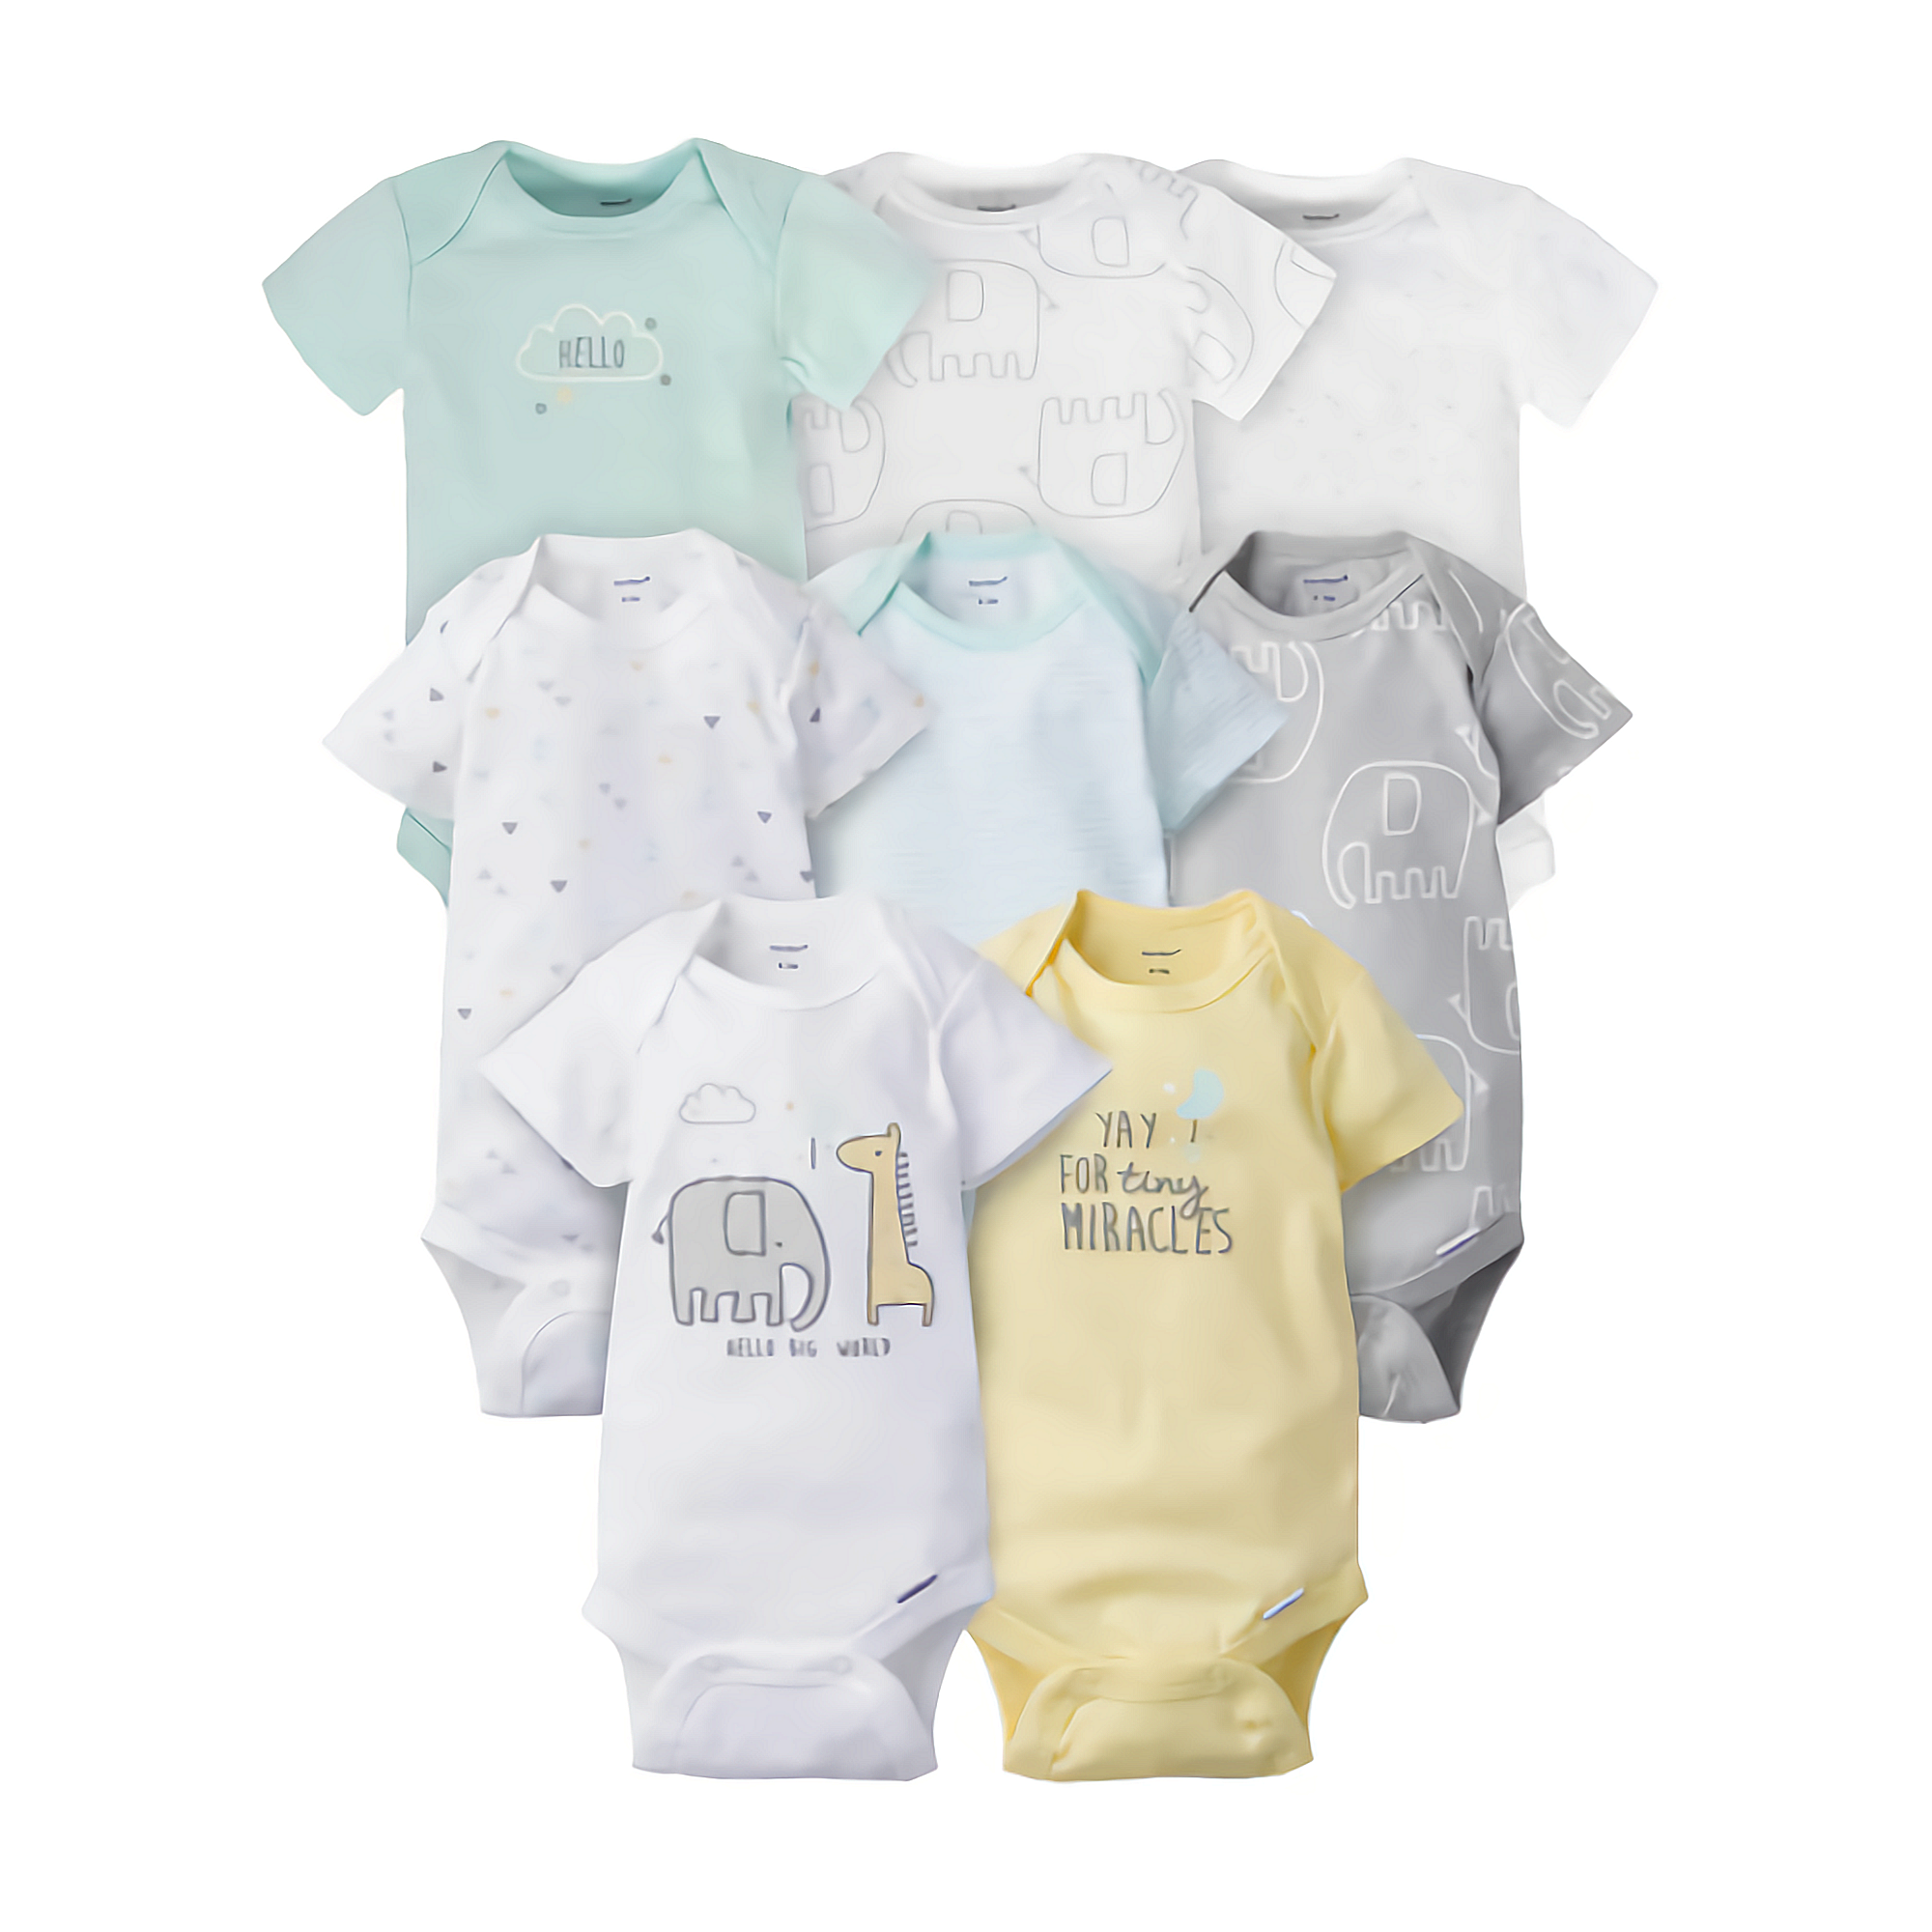 Gerber® 8-Pack 100% Cotton Baby Neutral Animals Short Sleeve Onesies® Bodysuits 0-3M (Polybag)